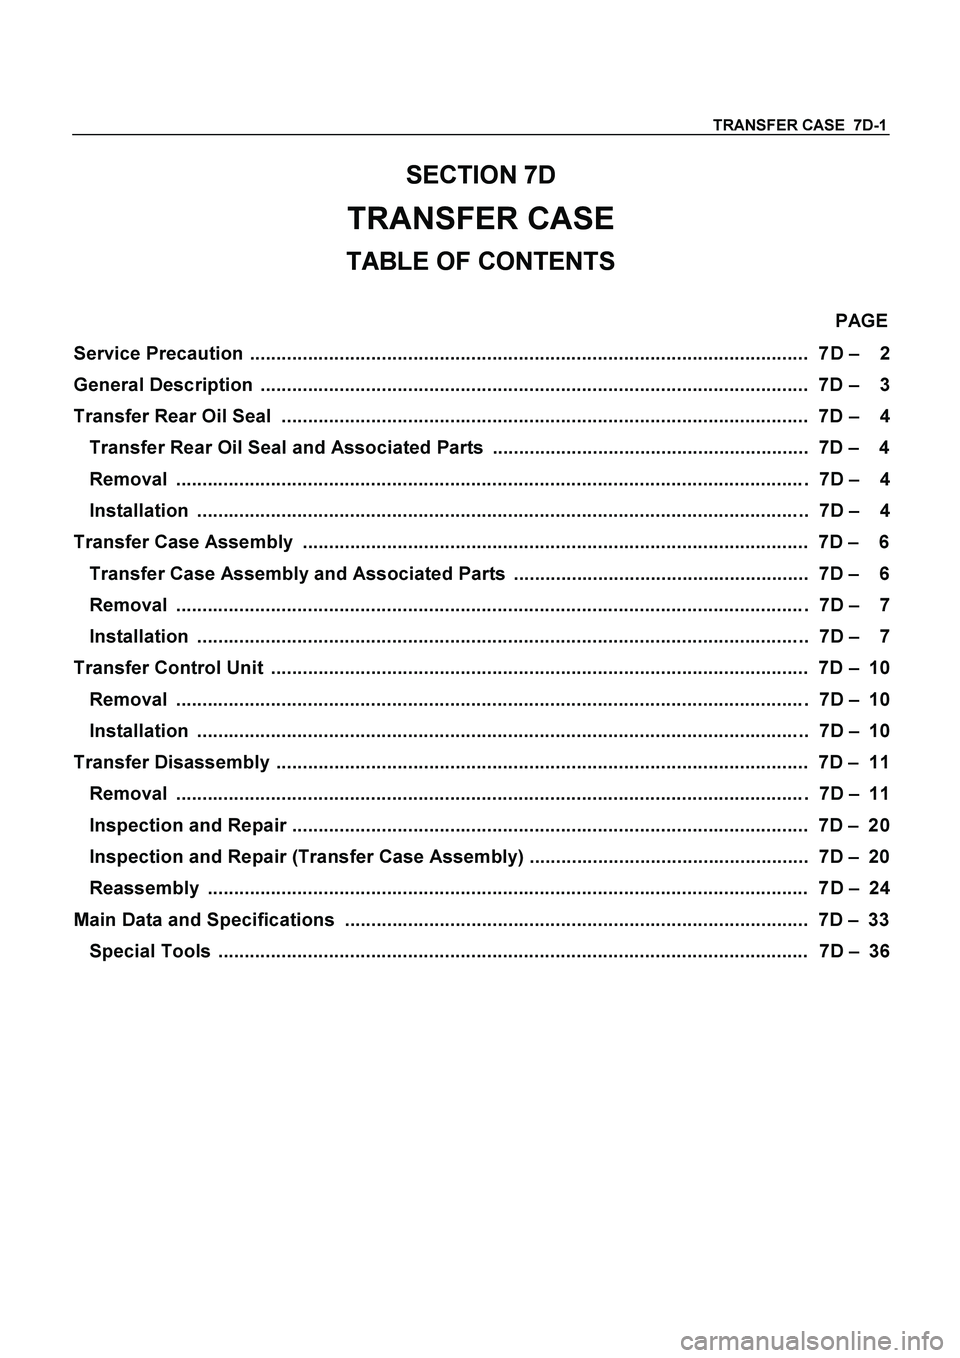 ISUZU TF SERIES 2004  Workshop Manual TRANSFER CASE  7D-1
 
SECTION 7D 
TRANSFER CASE 
TABLE OF CONTENTS 
 PAGE 
Service Precaution ..........................................................................................................